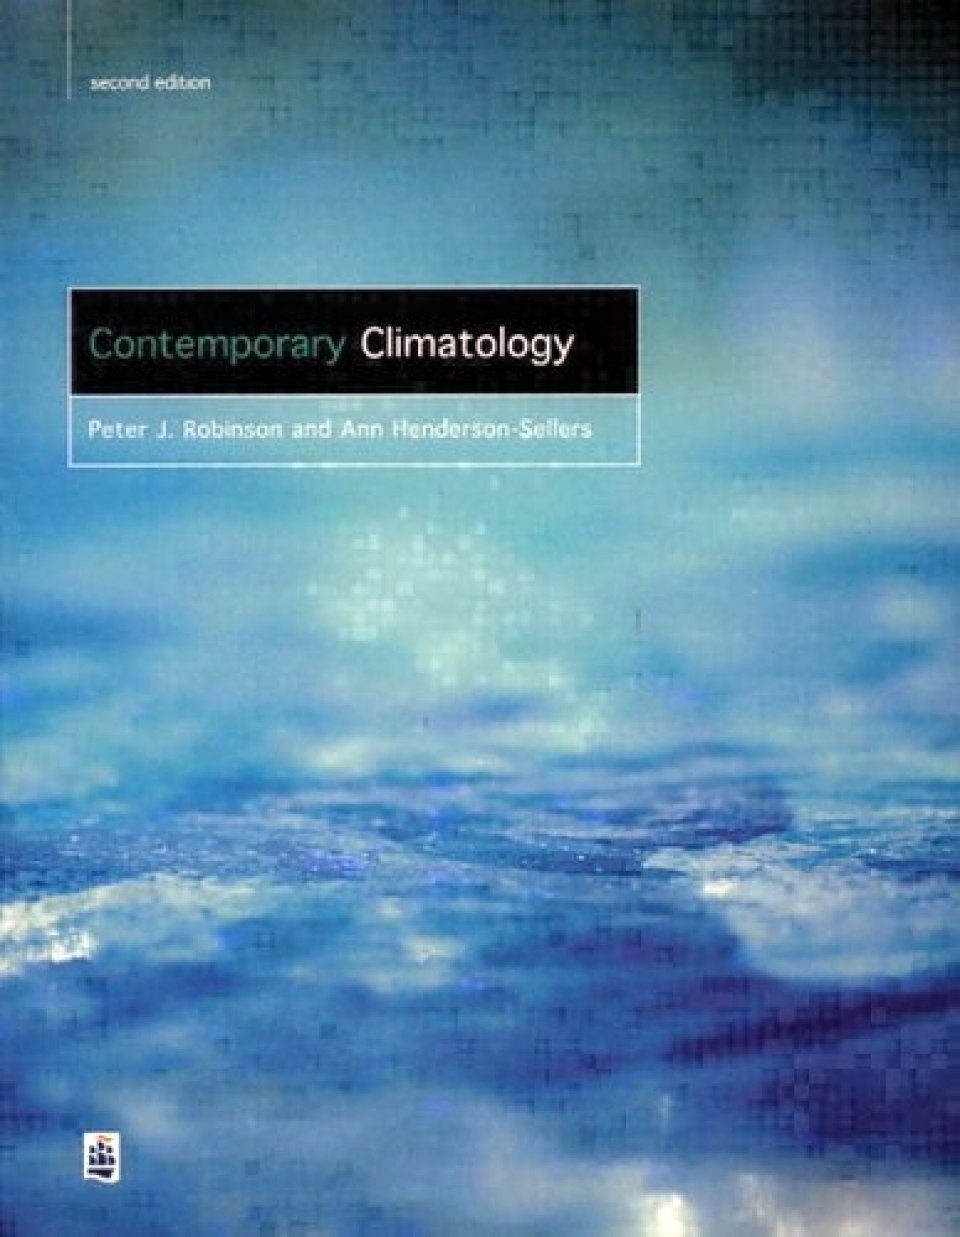 Contemporary Climatology | NHBS Academic & Professional Books